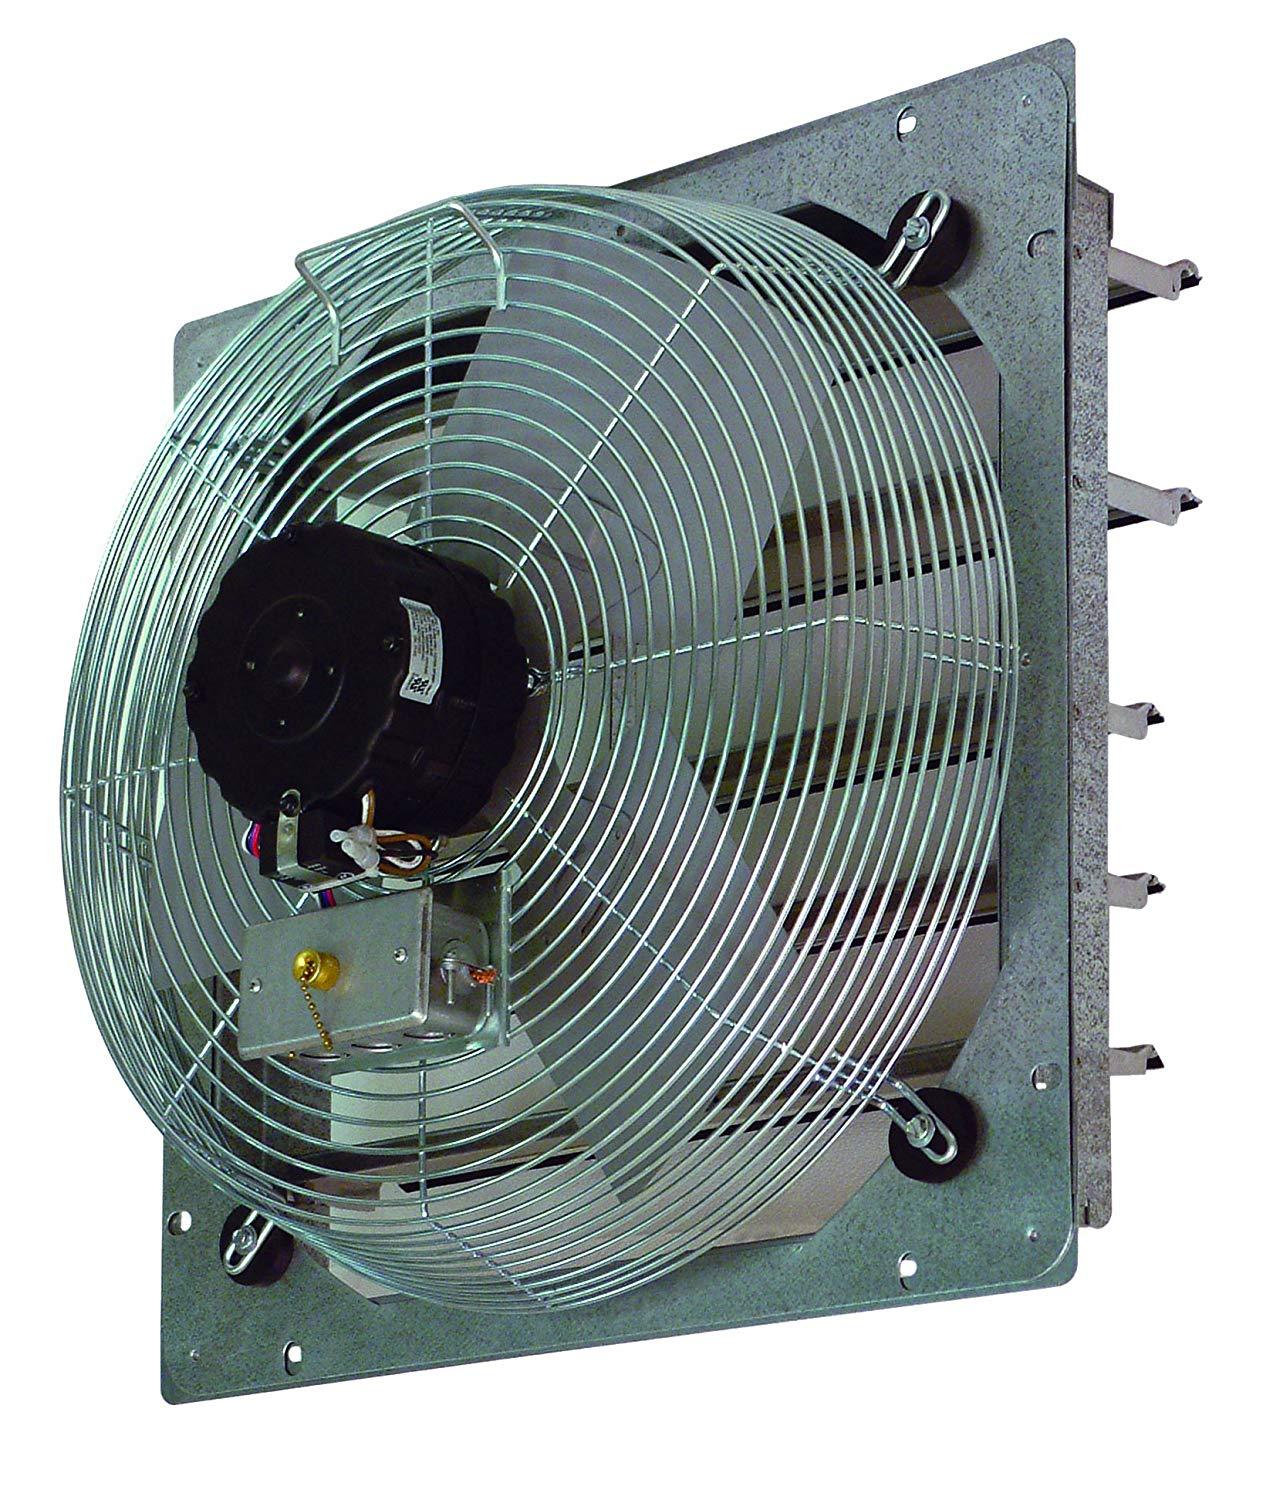 TPI 14" 3-Speed 1/8 HP Shutter Mounted Direct Drive Exhaust Fan - CE14DS